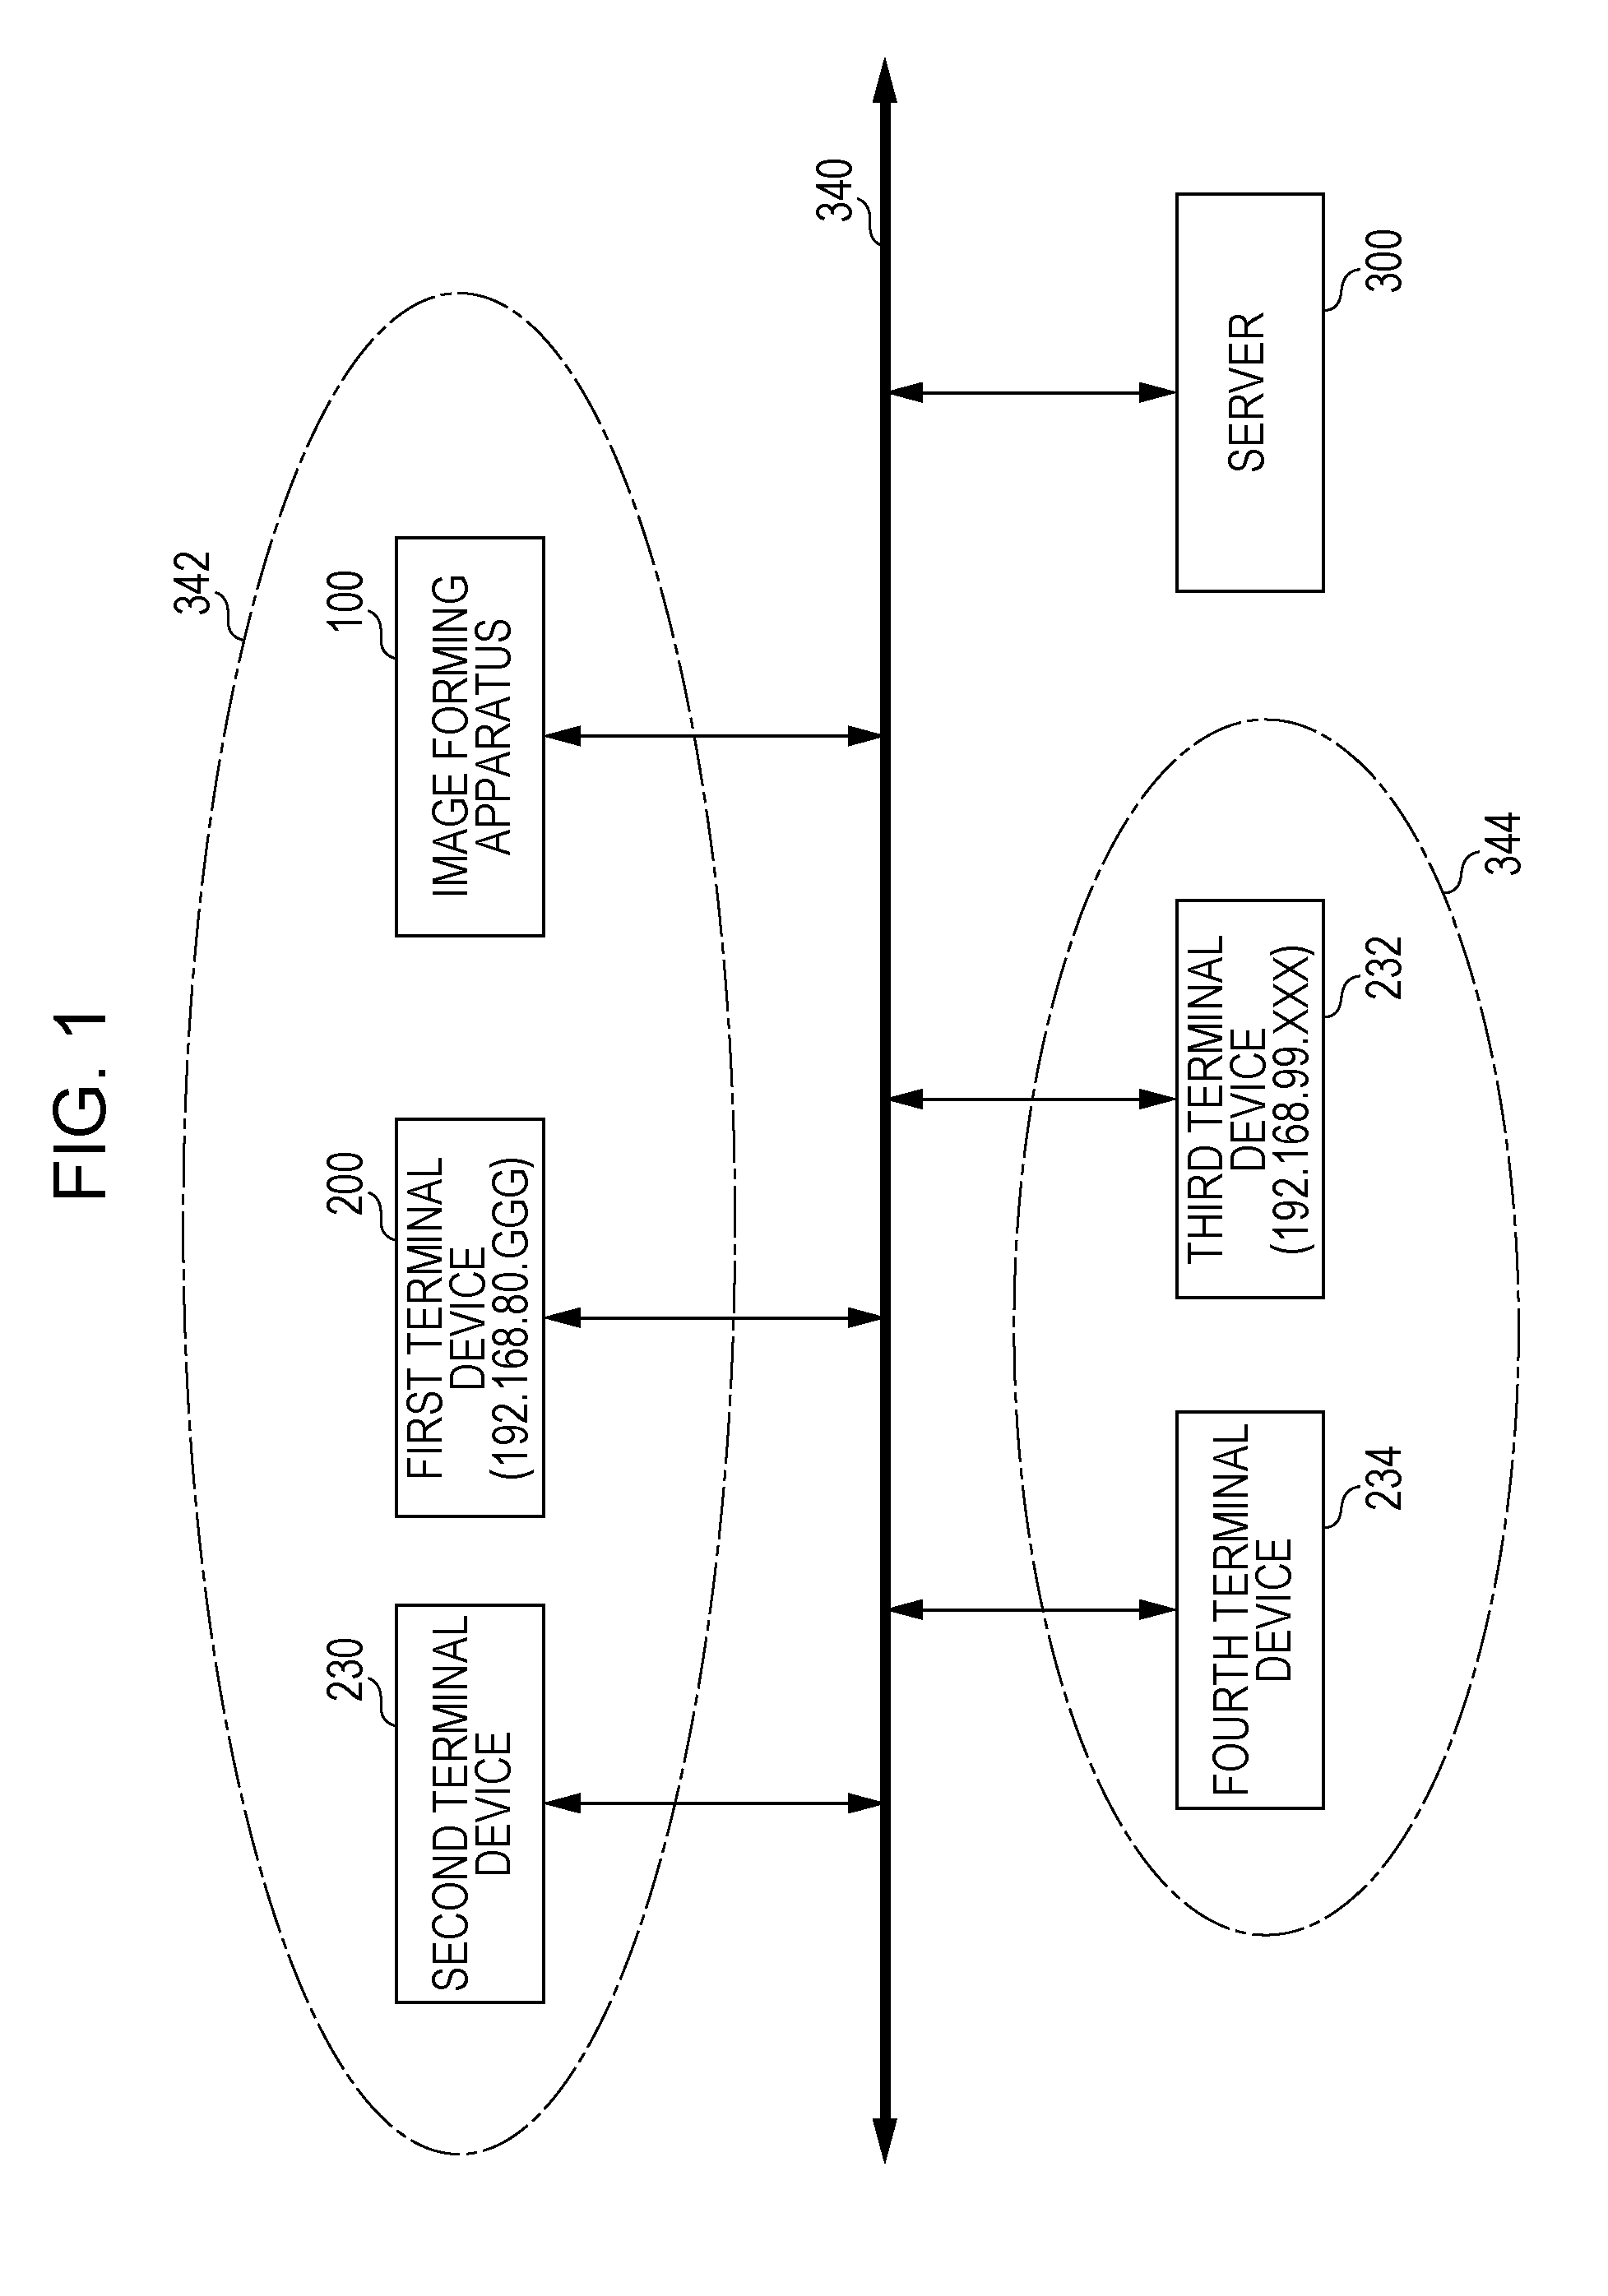 Image forming apparatus and network system including the same